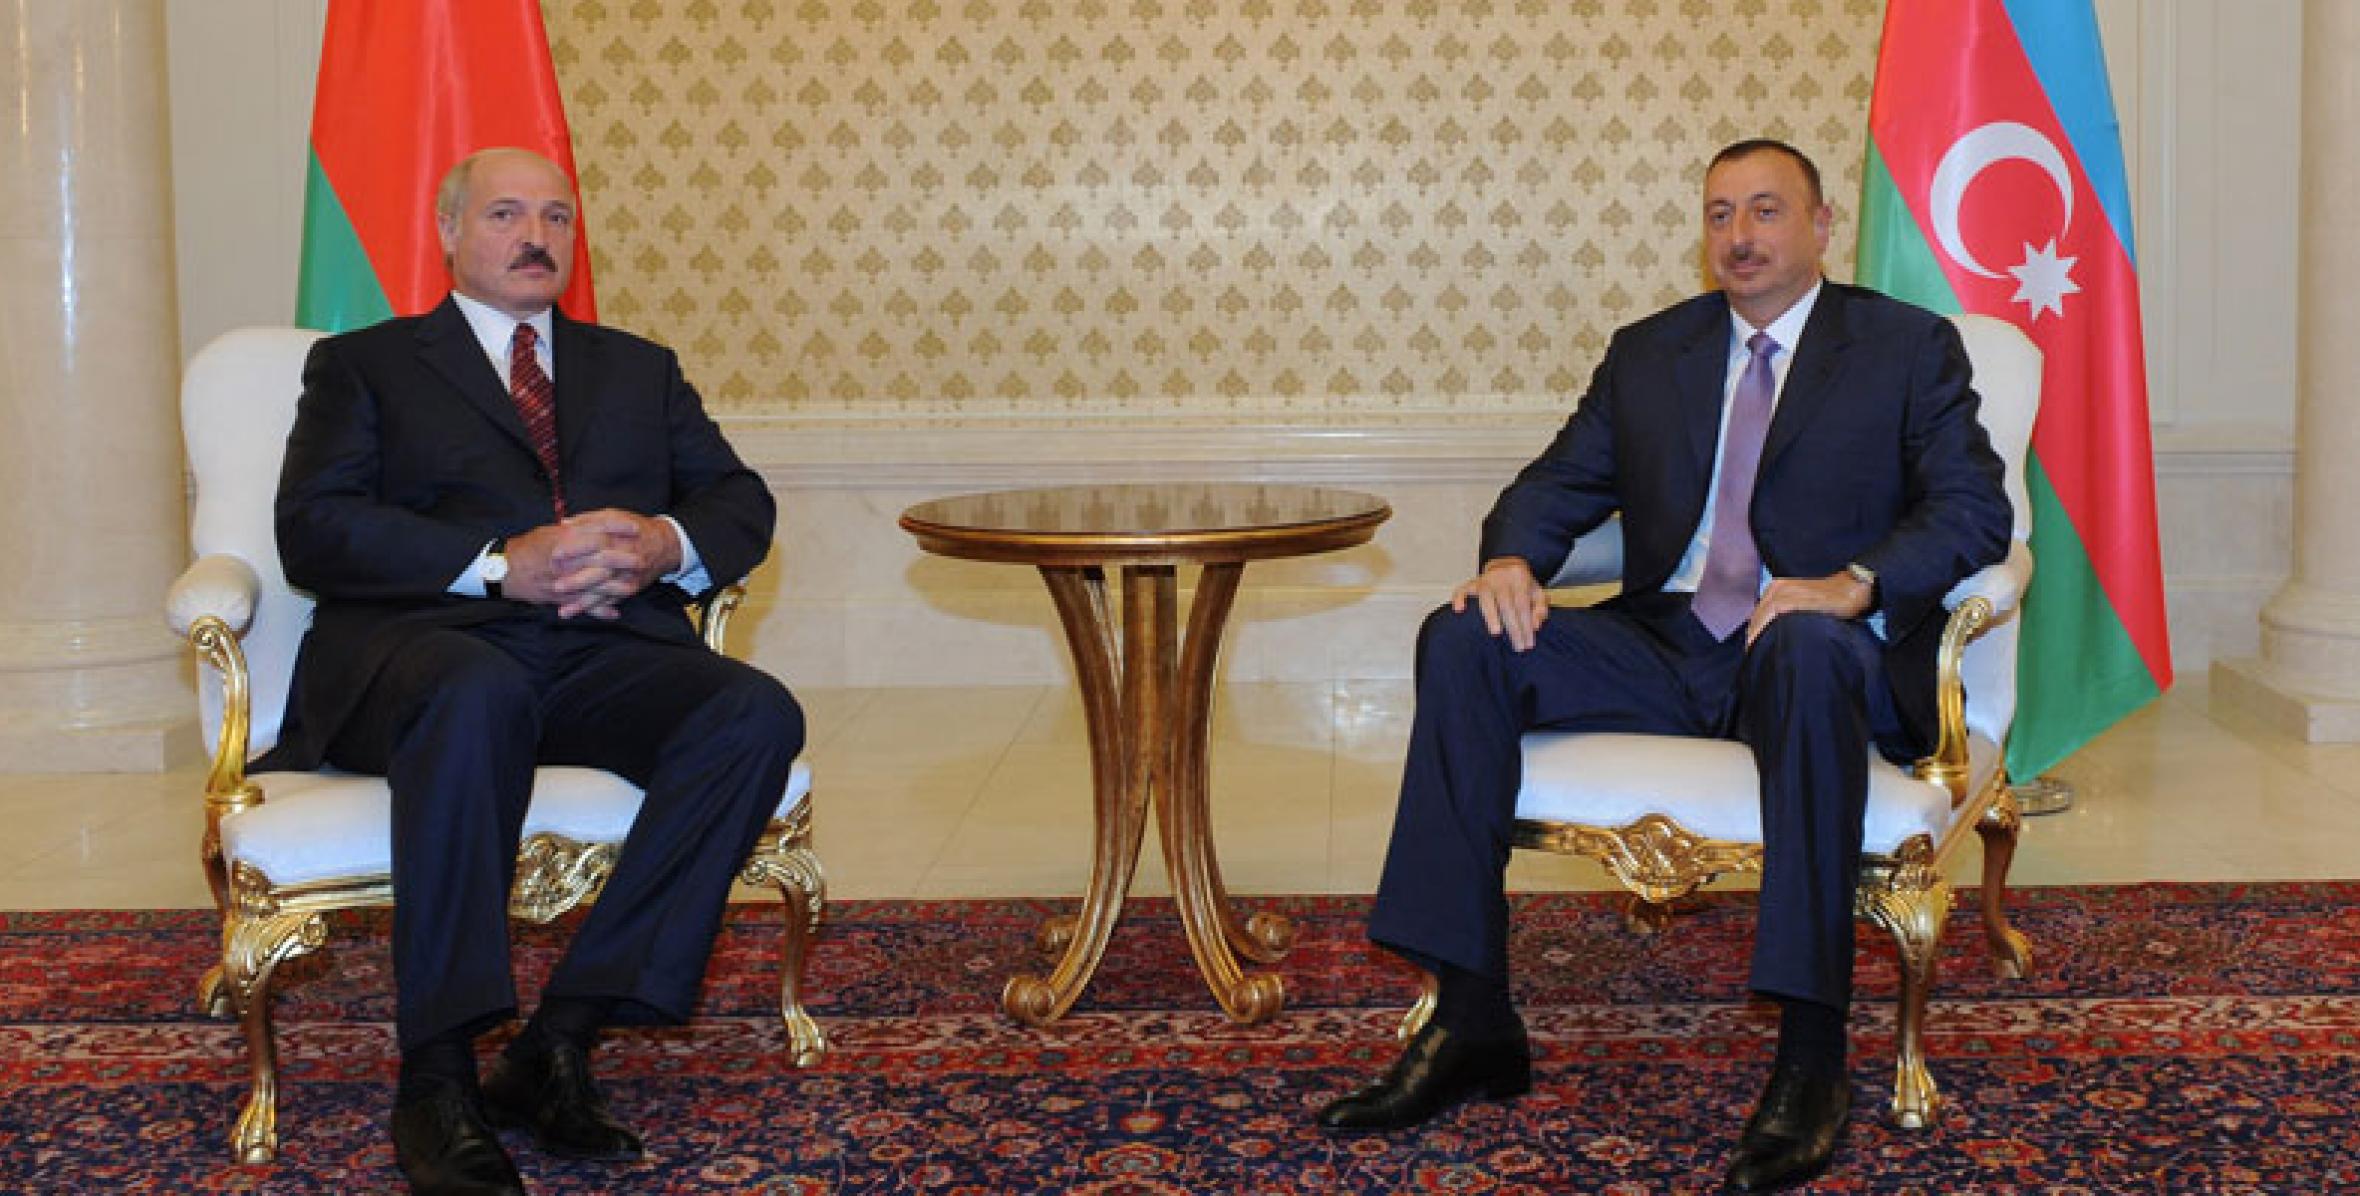 President Ilham Aliyev and Belarusian President Alexander Lukashenko held a meeting in private